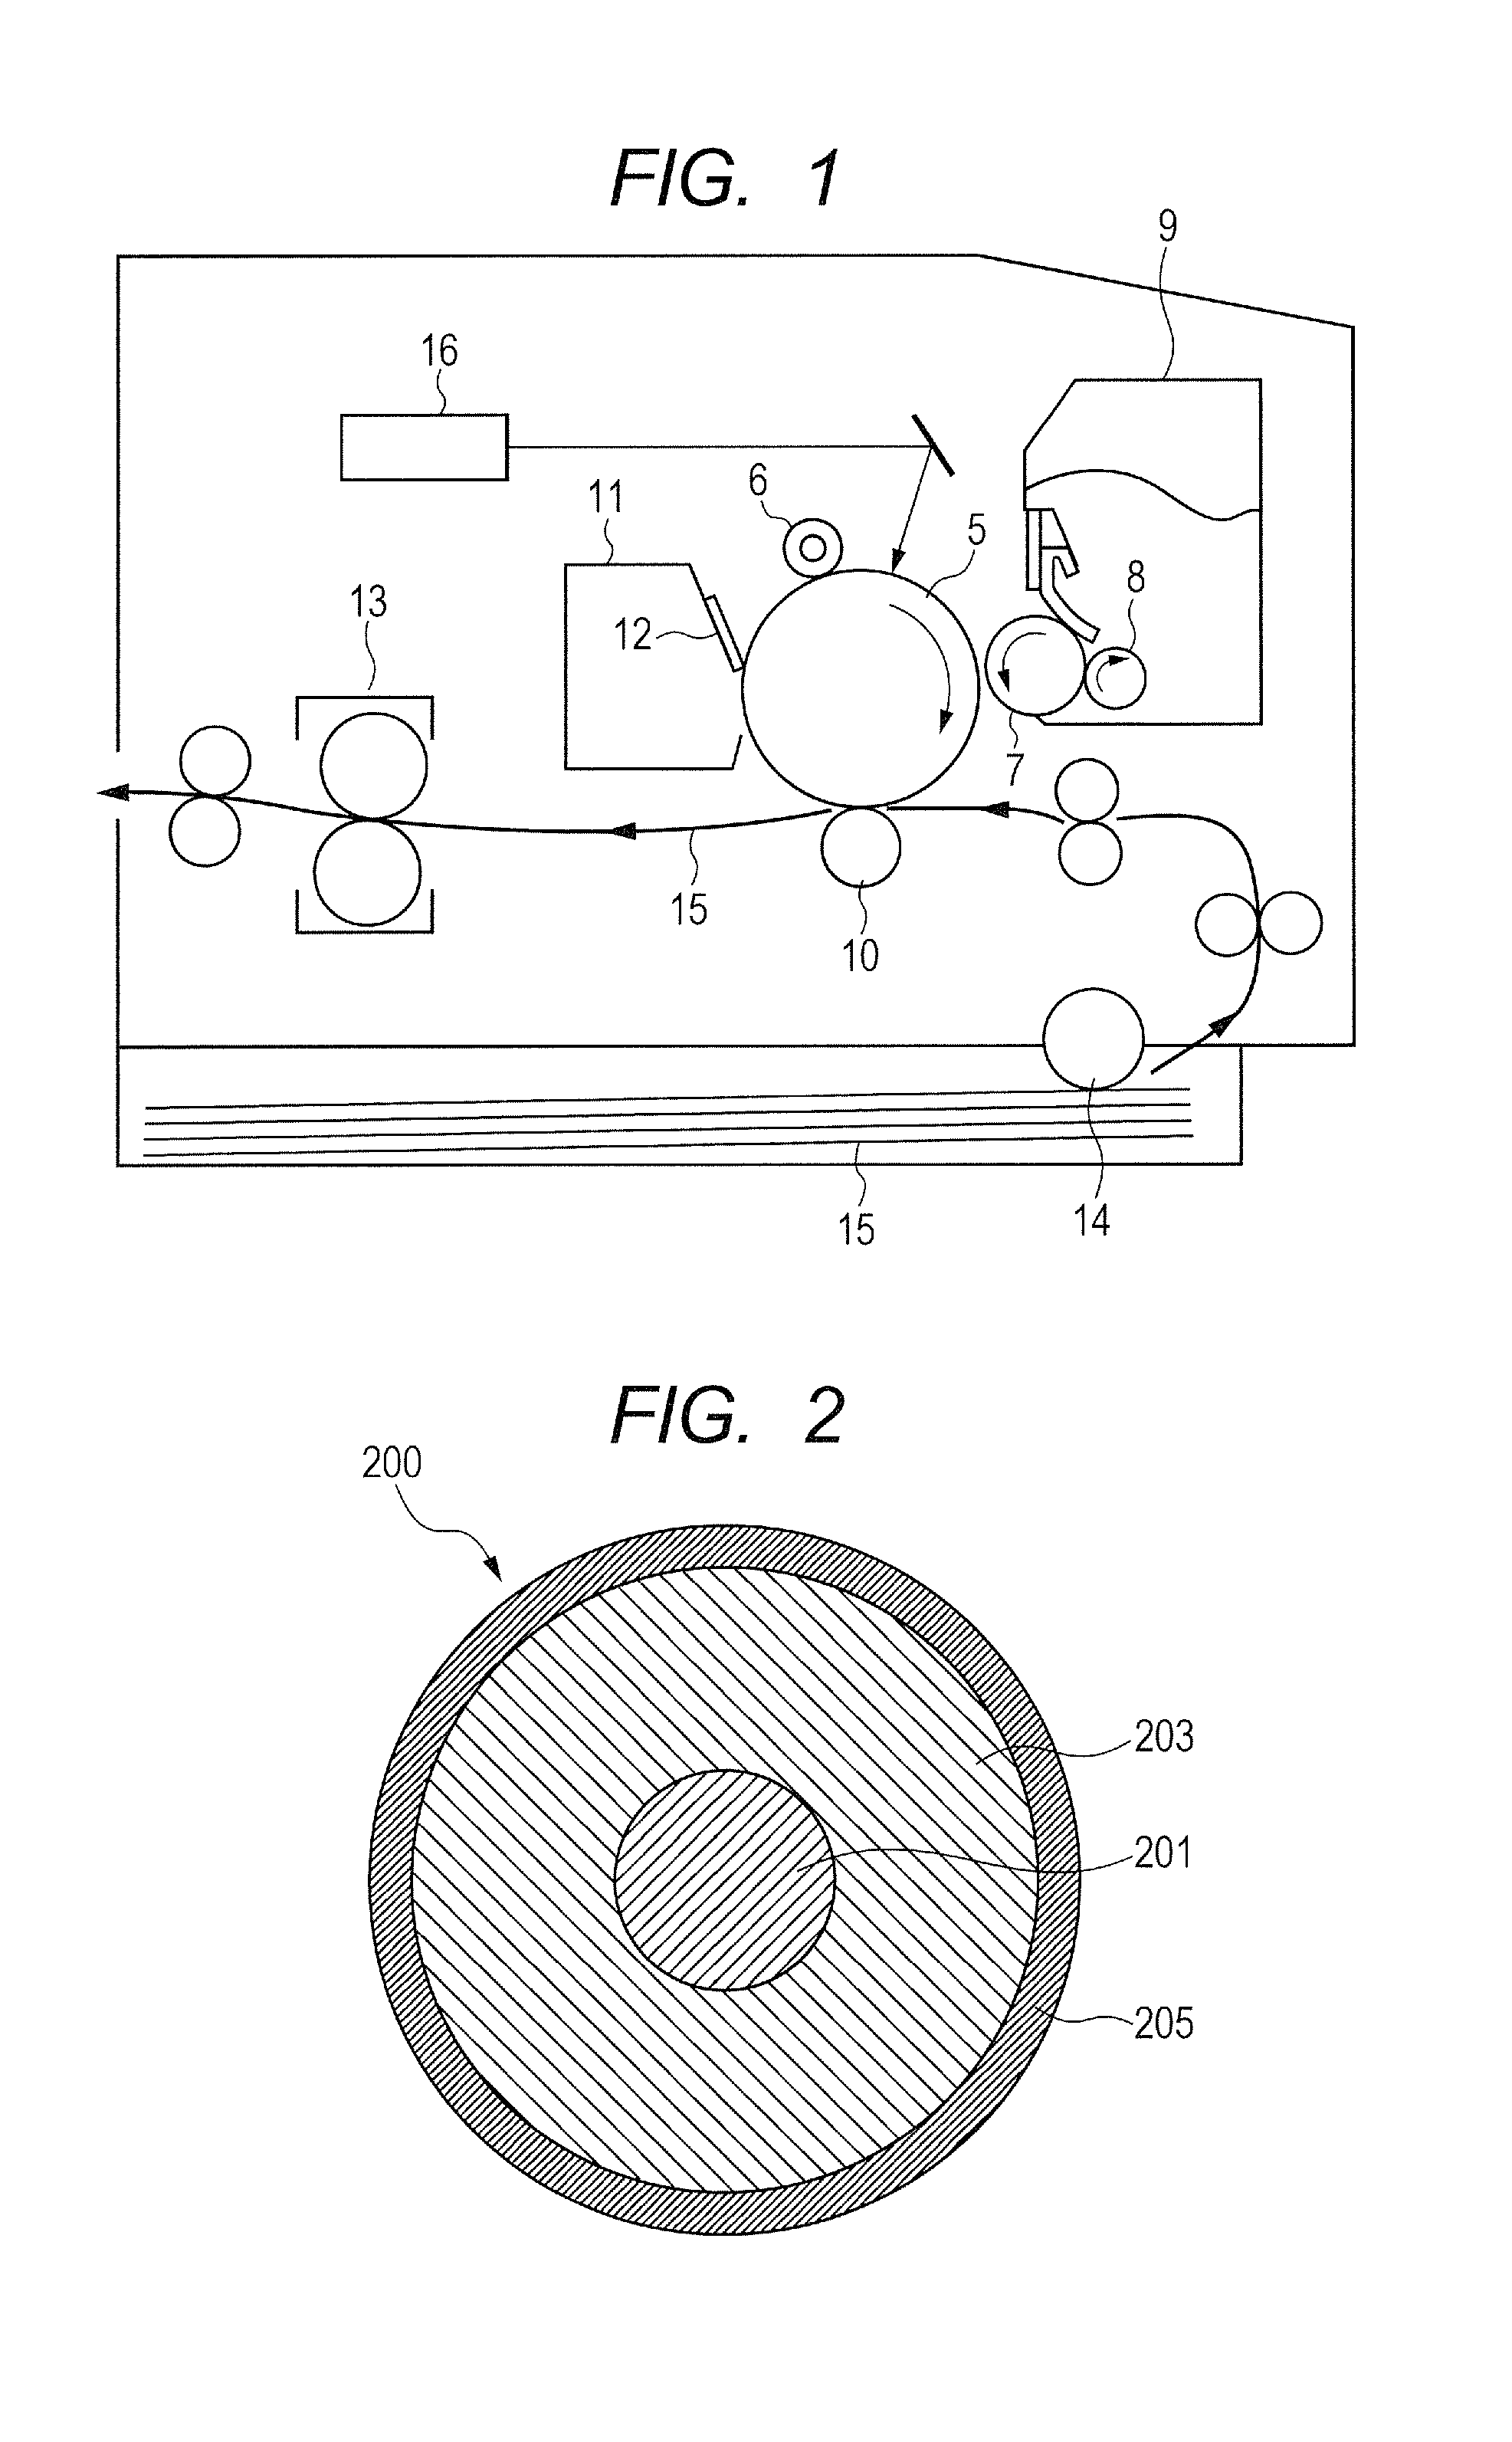 Member for electrophotography, method for producing the same, and image forming apparatus